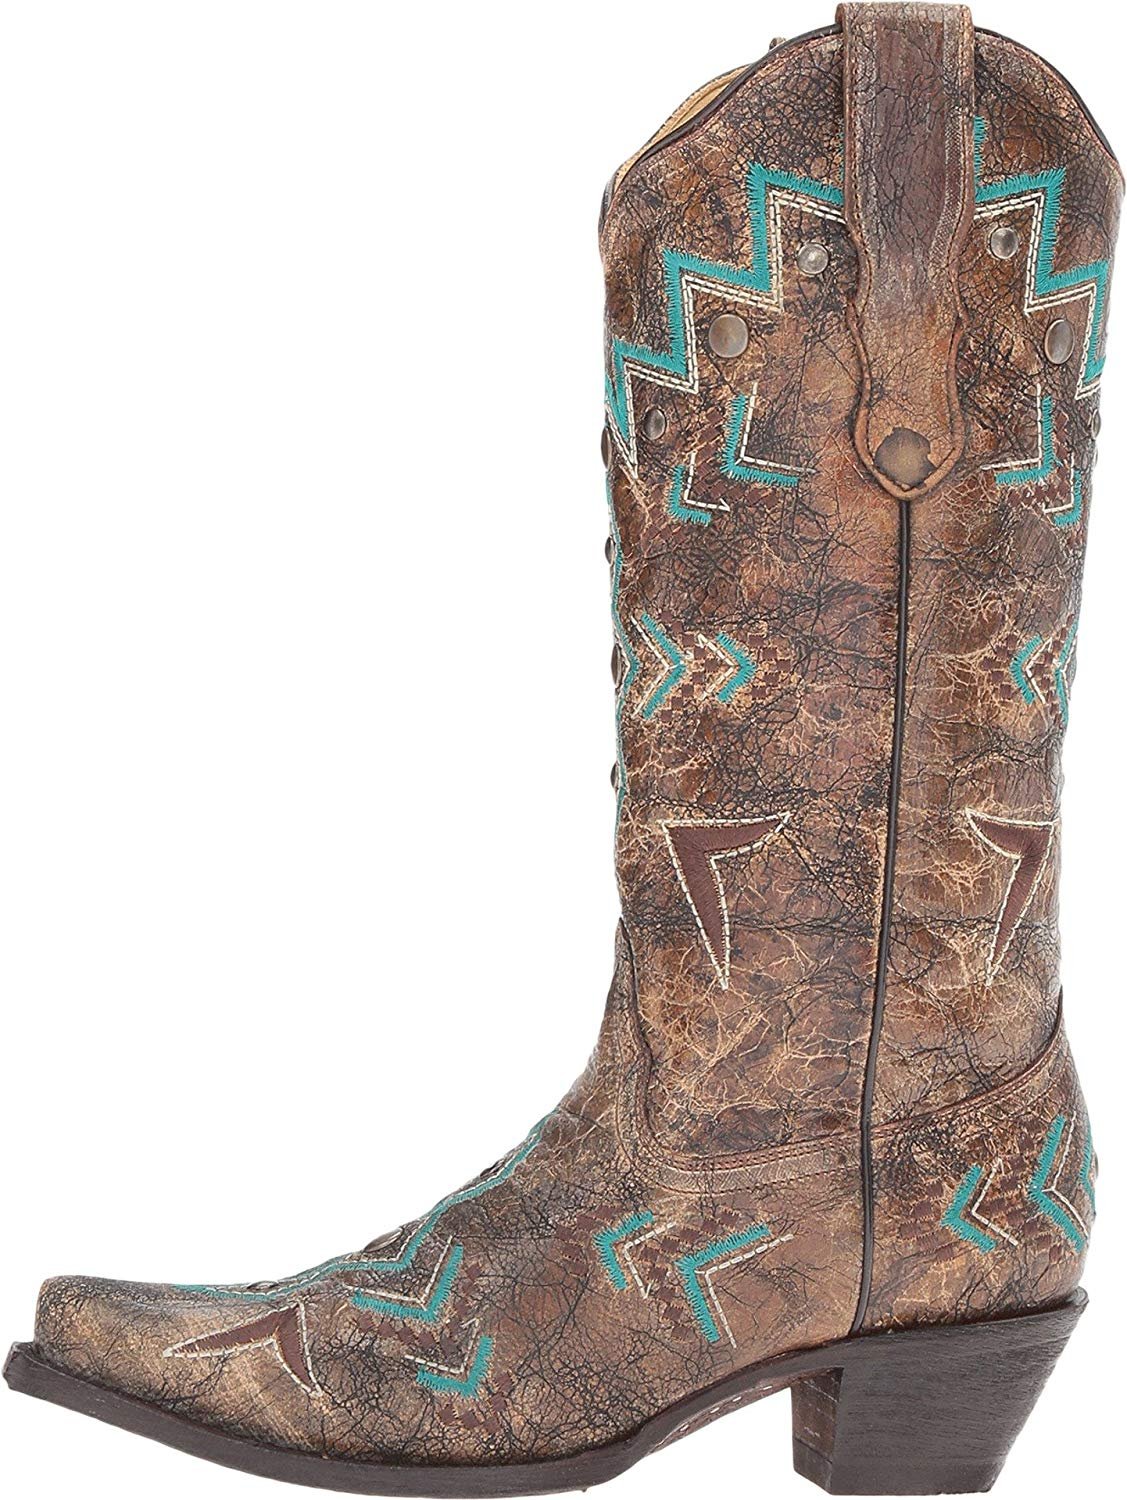 corral color changing boots